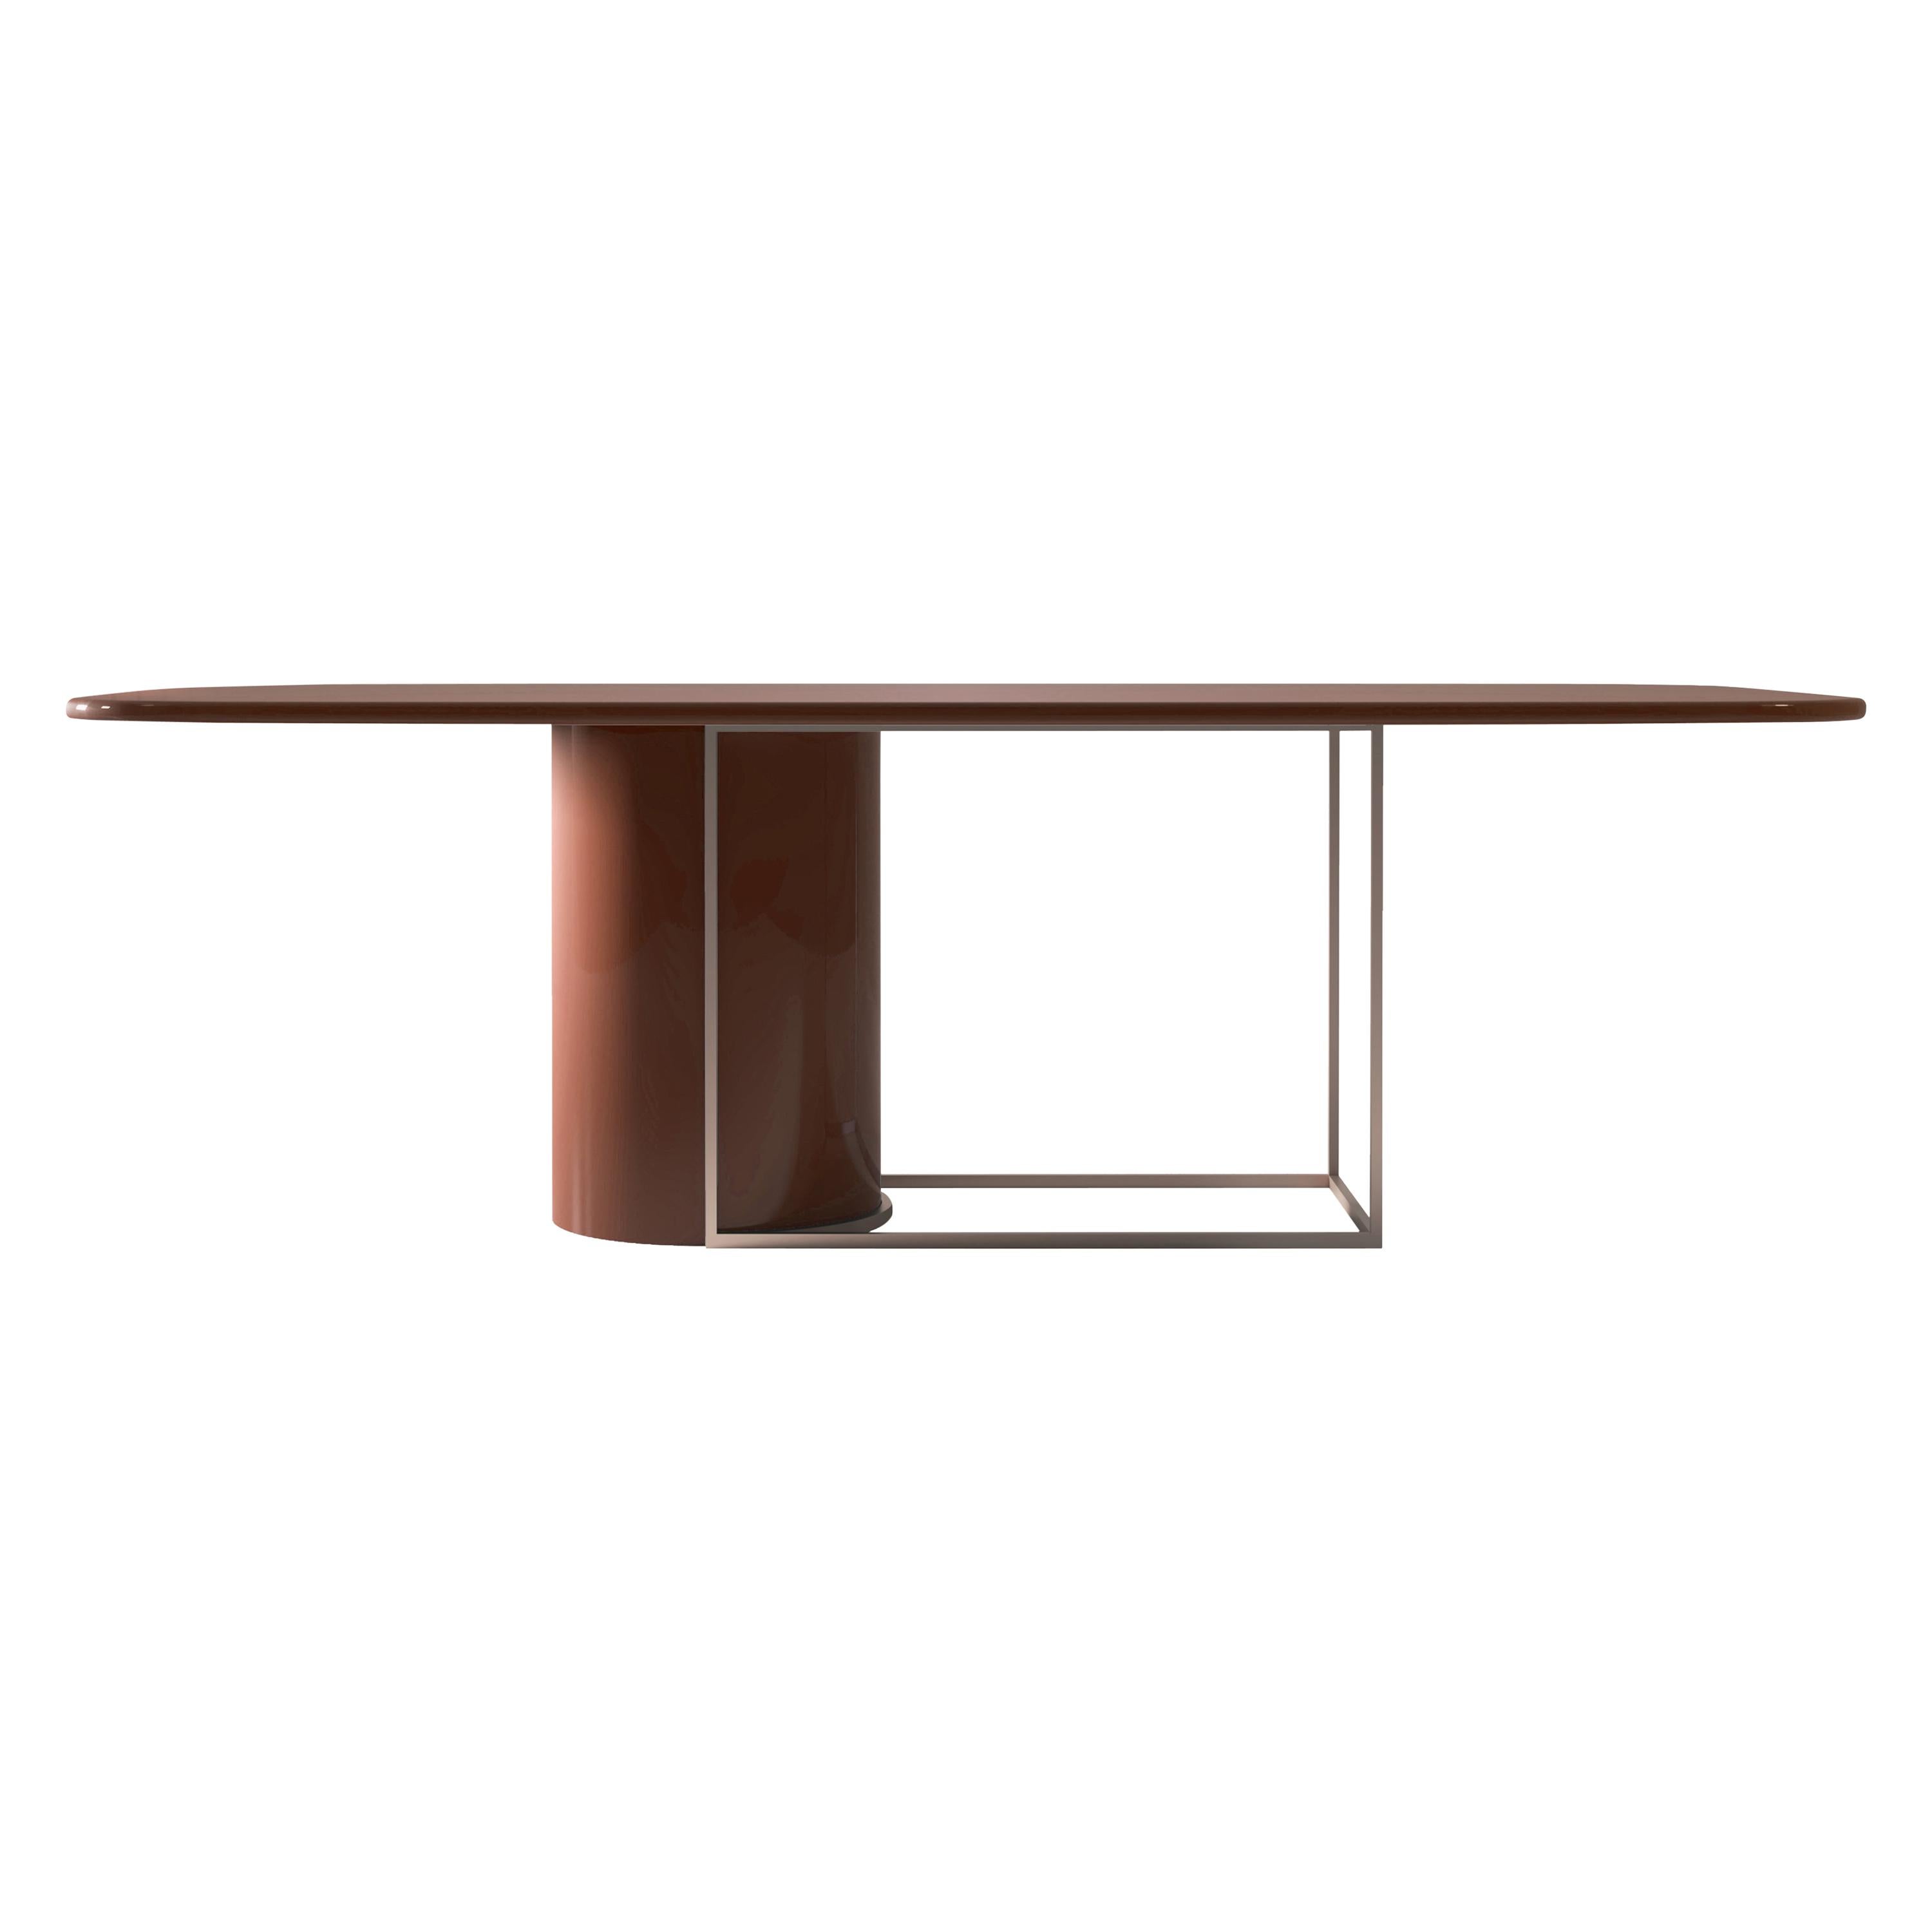 Horus Contemporary Dining Table in Wood and Metal by Artefatto Design Studio